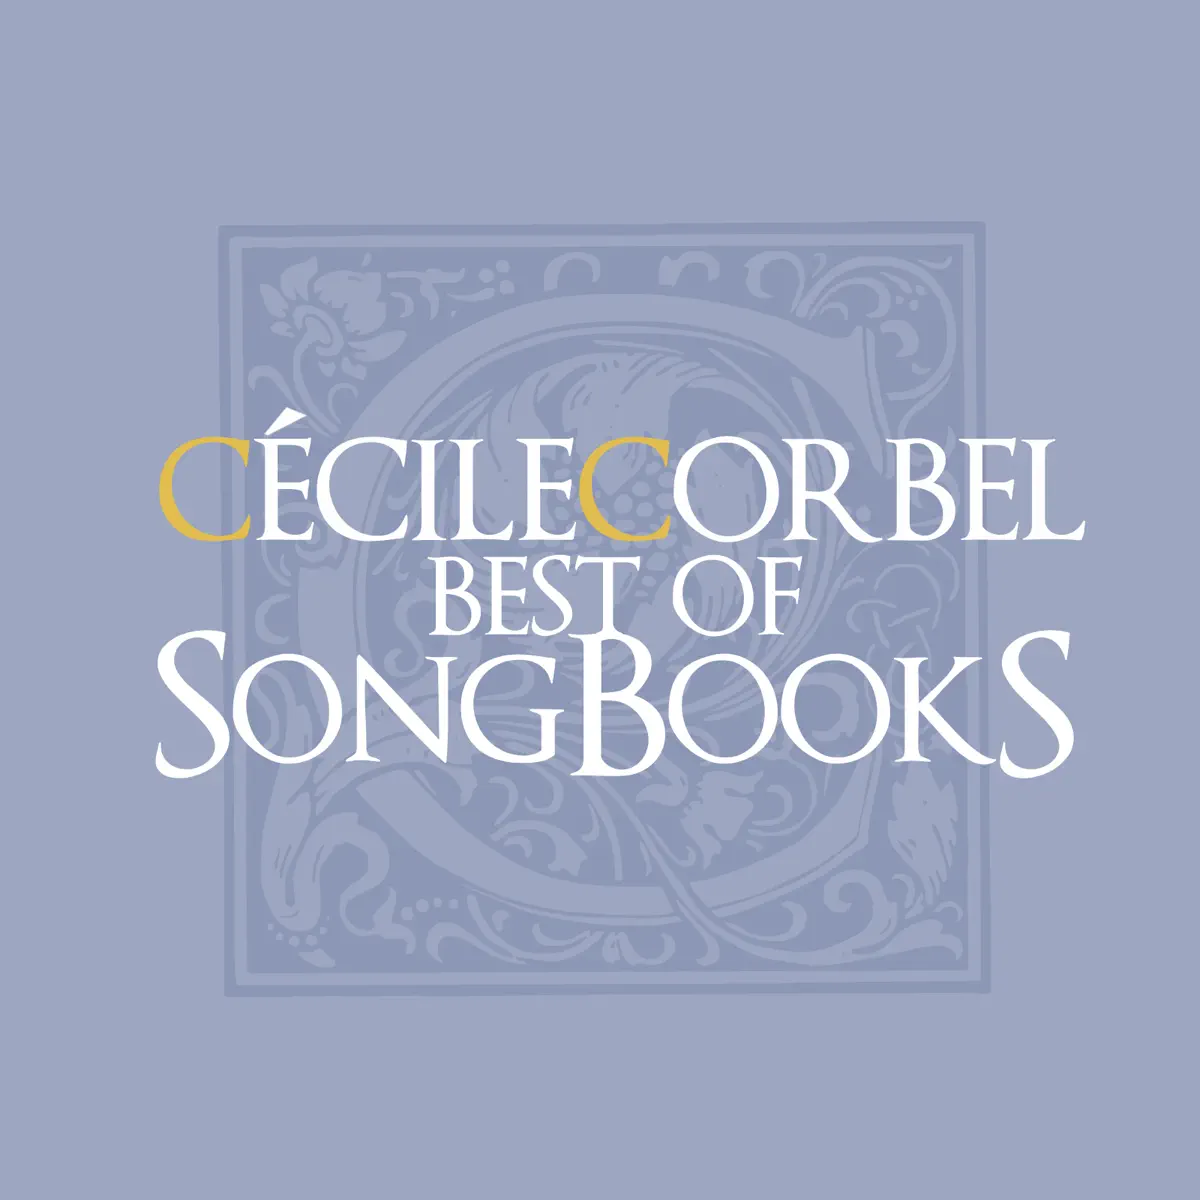 Cecile Corbel - Best of SongBooks (2014) [iTunes Plus AAC M4A]-新房子